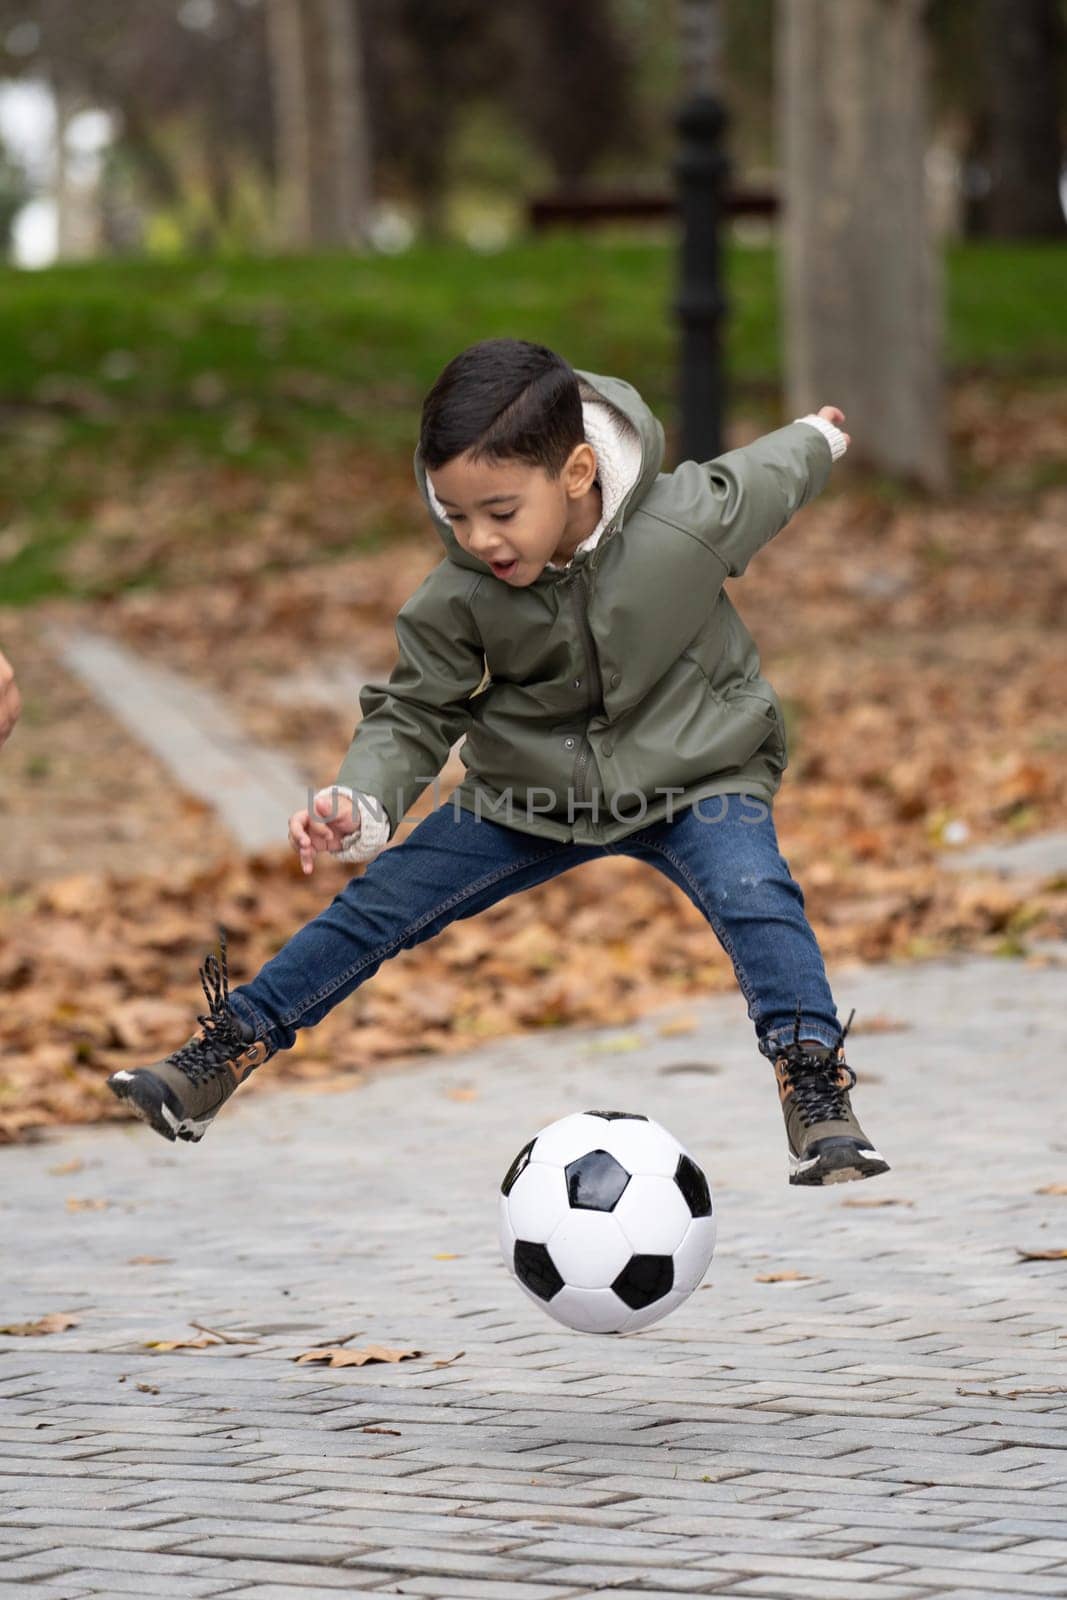 Happy kid with soccer ball jumping outdoors in a public park.